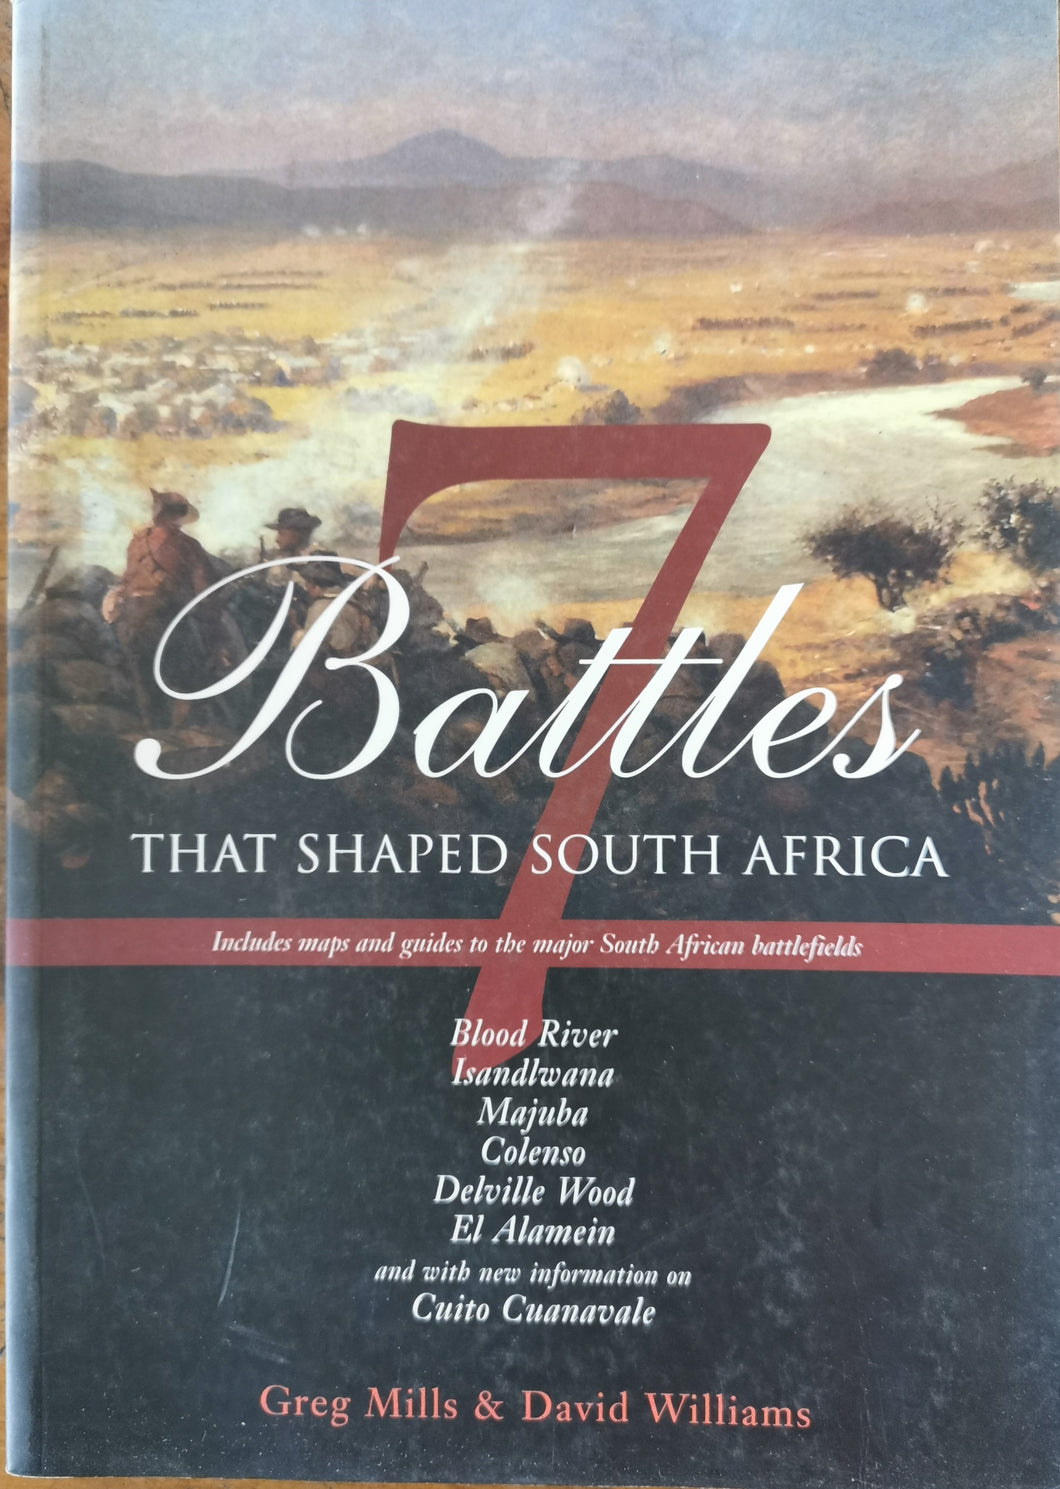 7 Battles that shaped South Africa by Greg Mills and David Williams